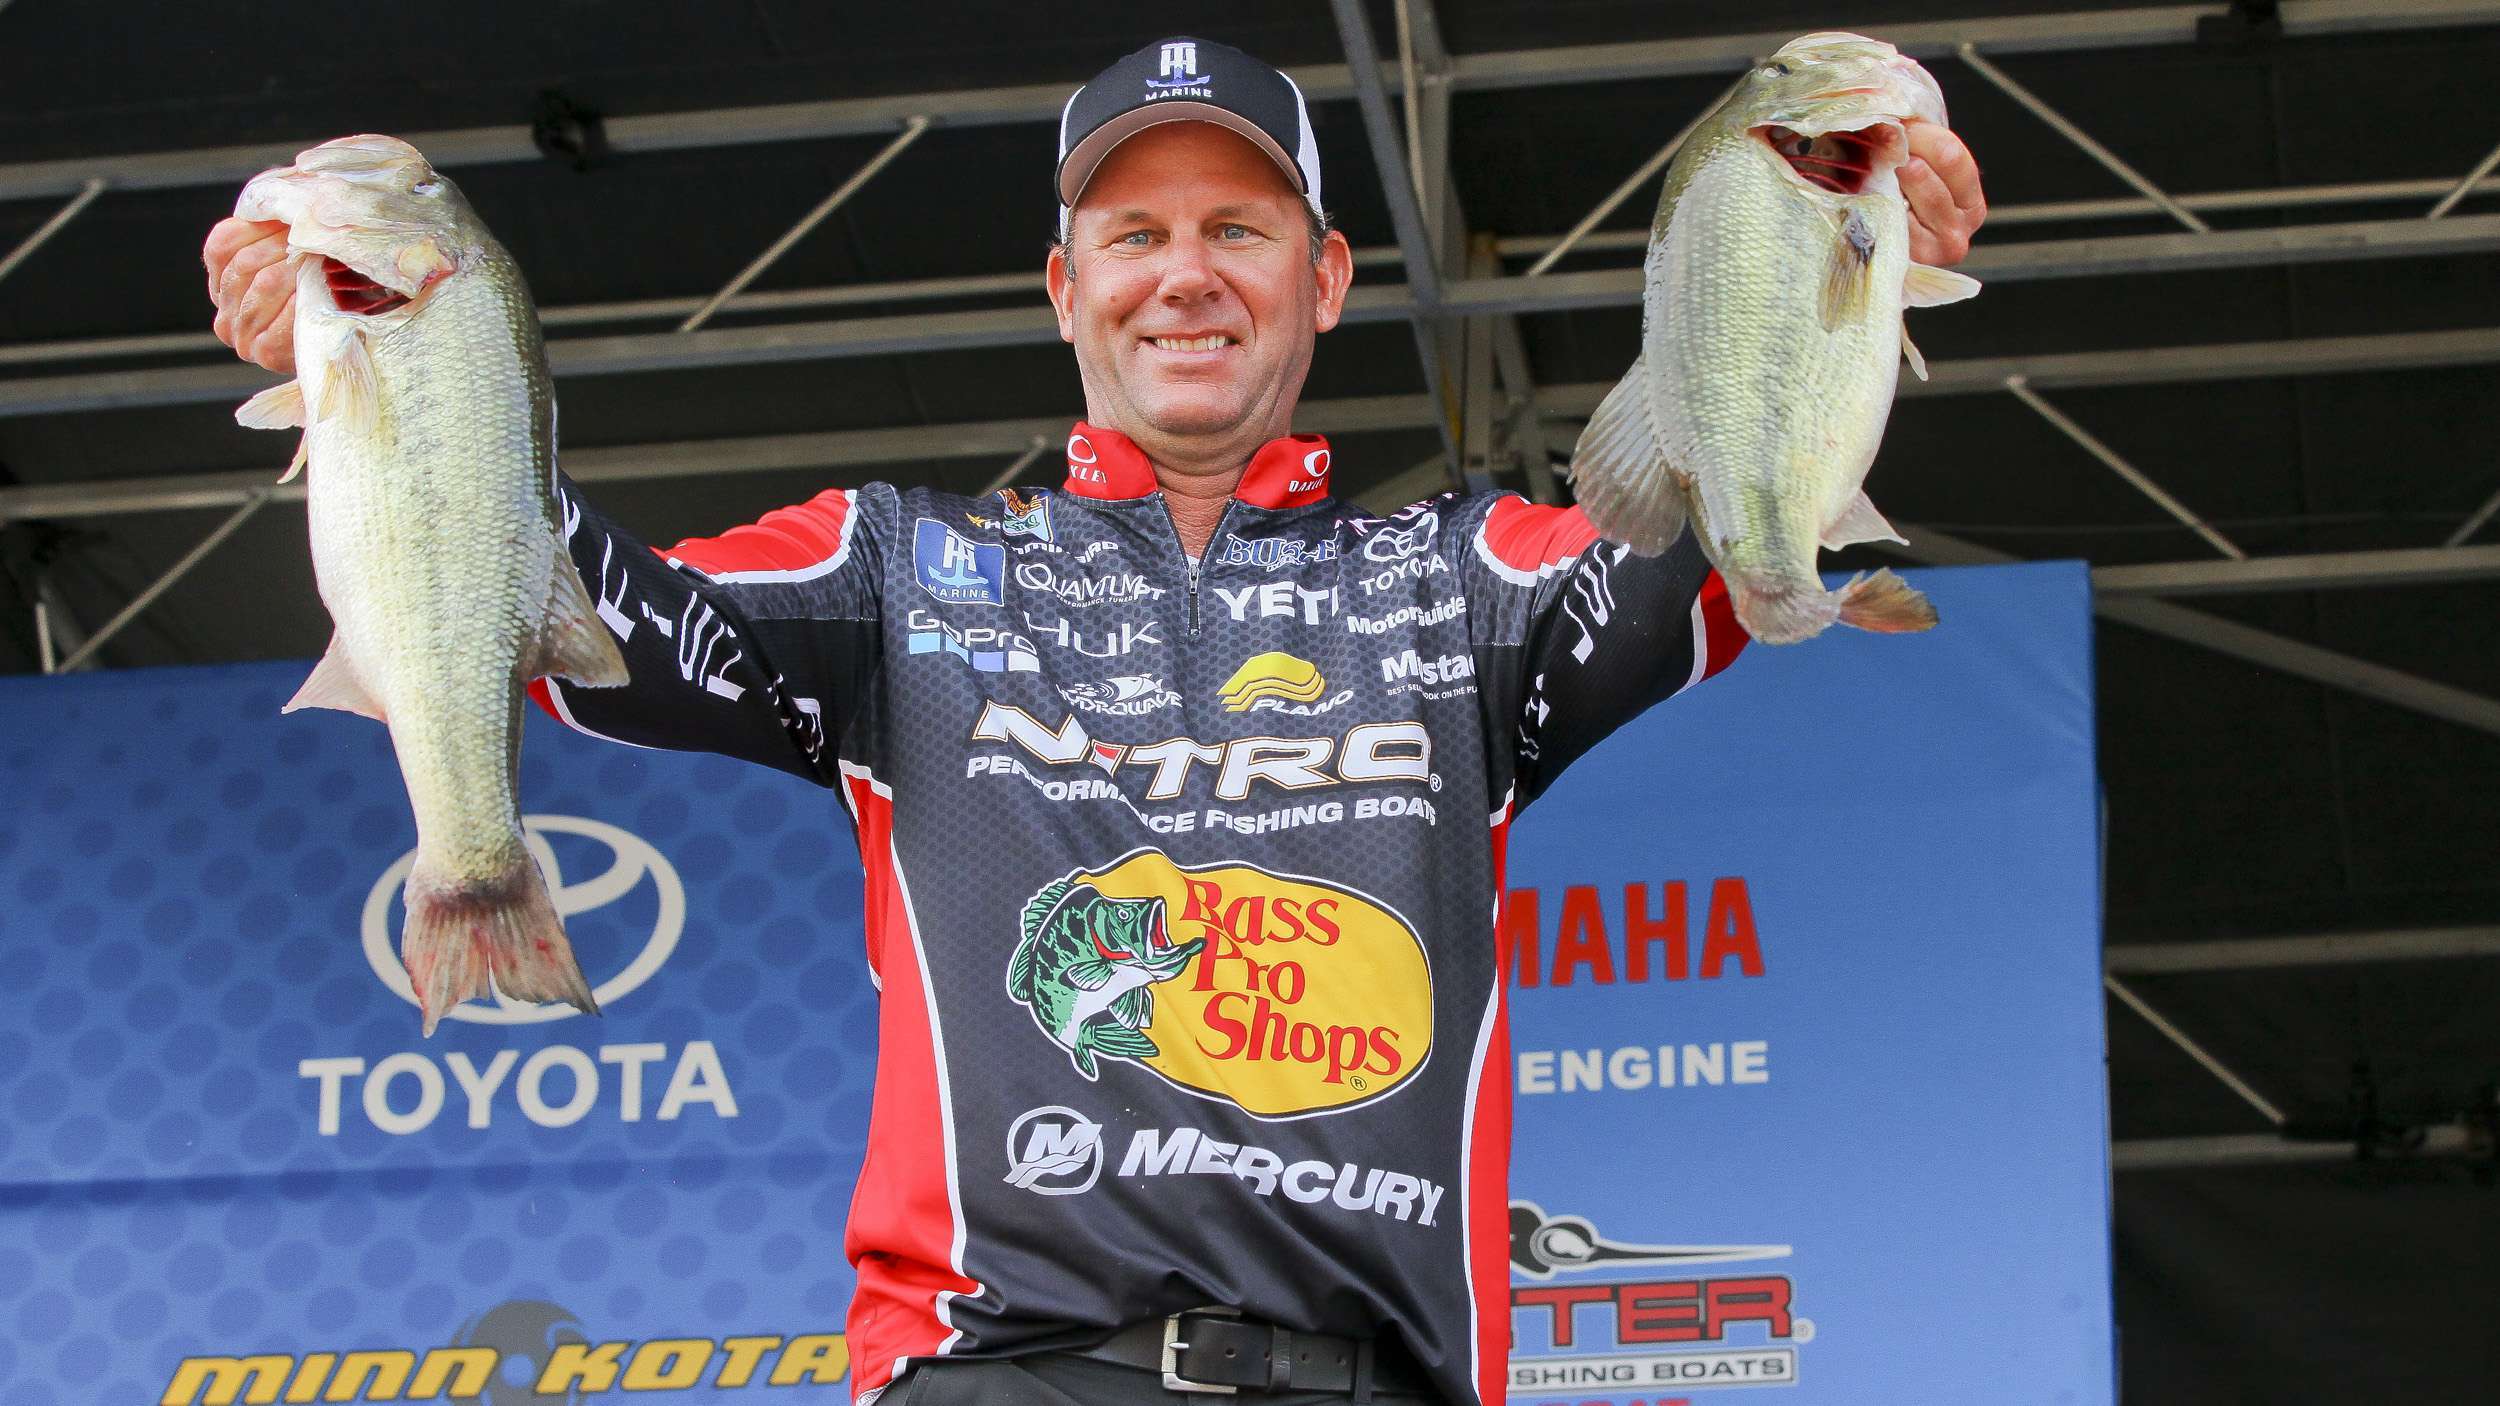 KVD has already come close to winning twice this season. The remaining events are on clear water lakes inhabited by largemouth and smallmouth, his favorite. That alone will be a confidence booster. The Michigan native is looking forward to all three events, especially in his home state at Lake St. Clair.
